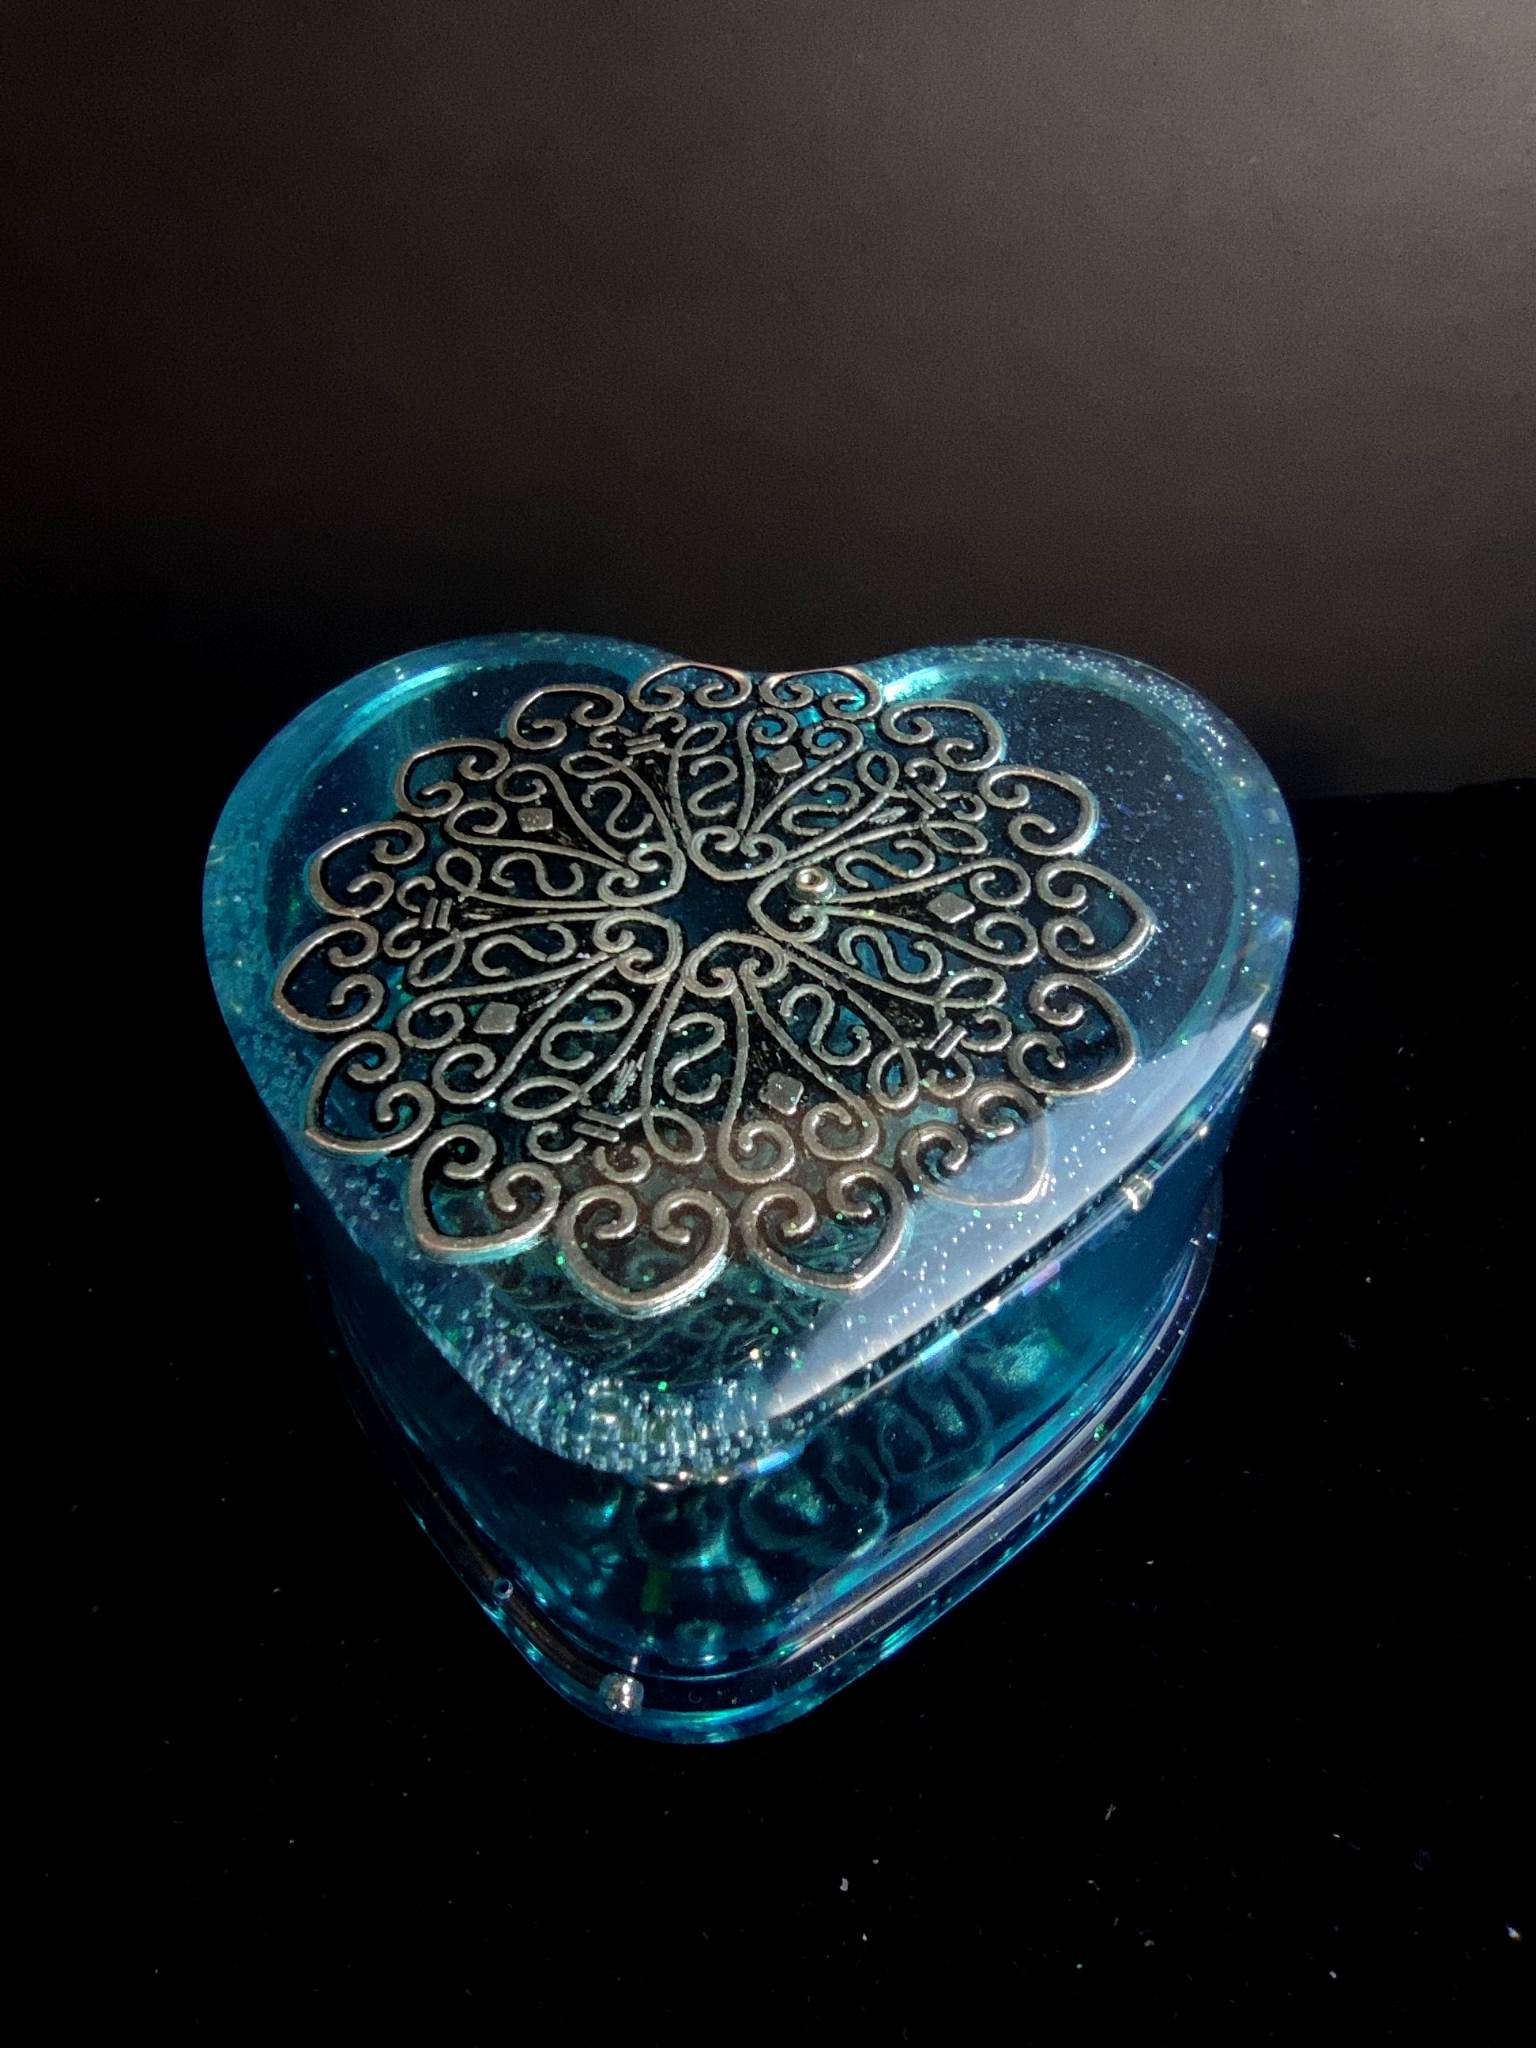 Magical orgonite box for storing semi-precious stones, runes, and jewelry - Save my love